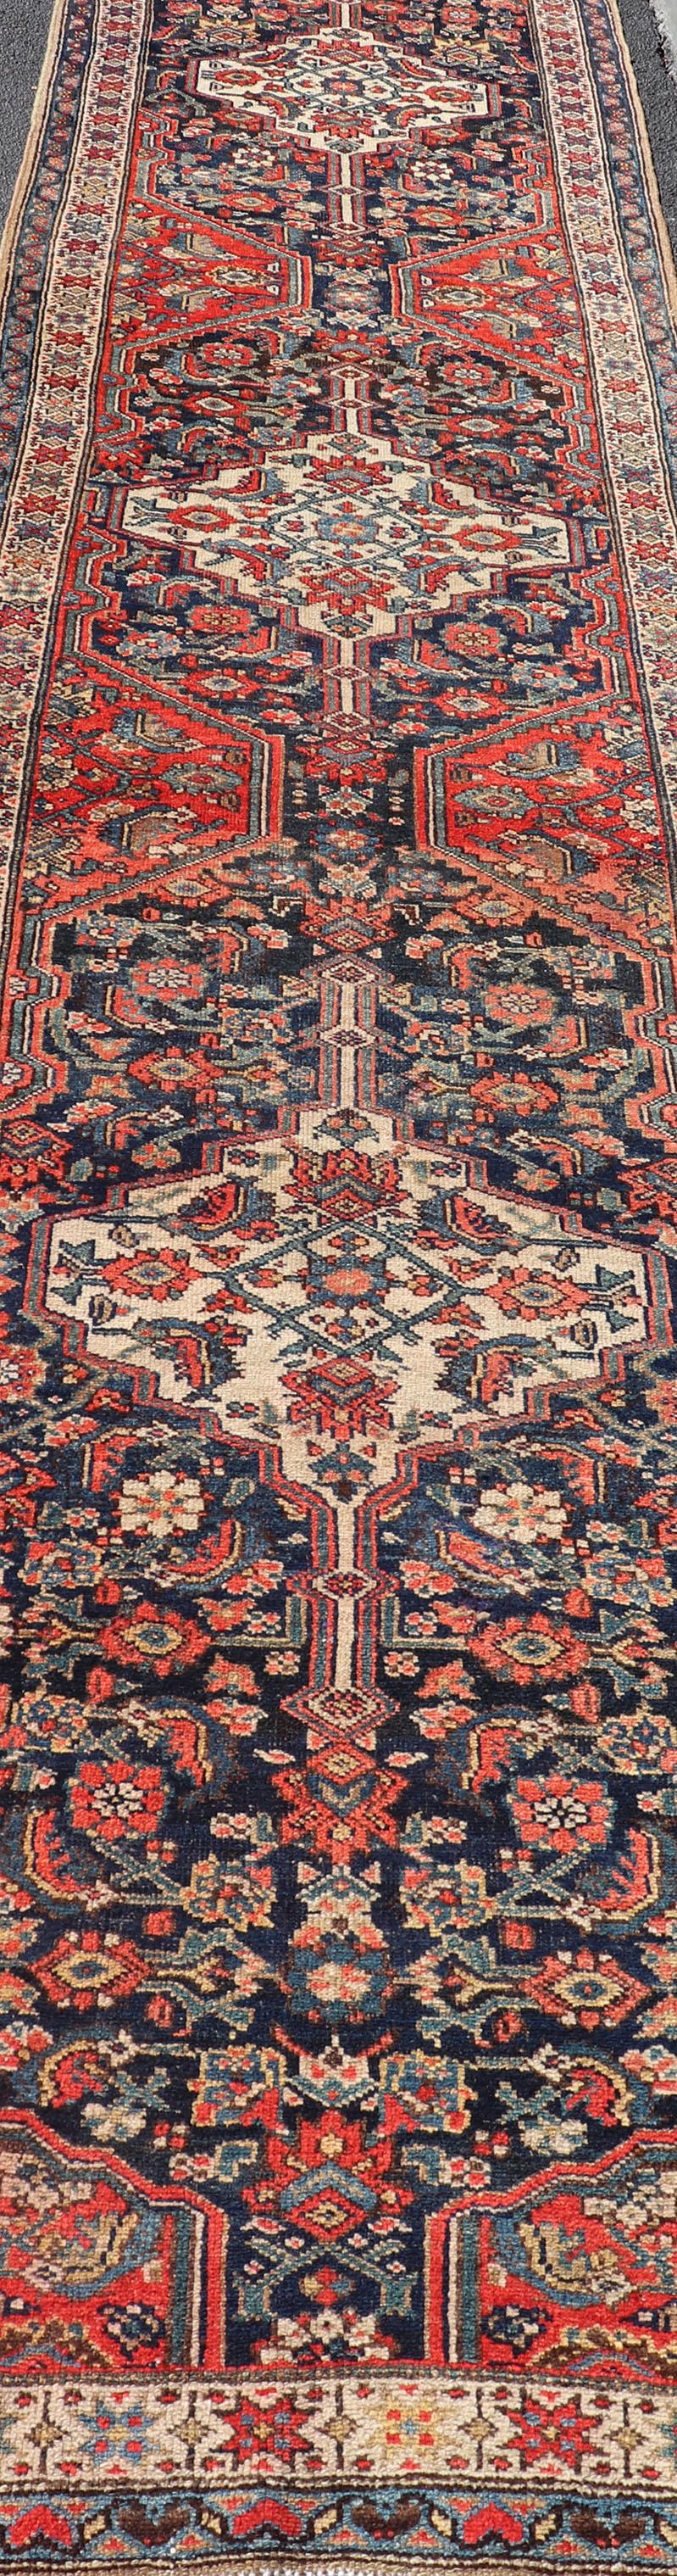 Antique Malayer Long Runner with Herati Pattern & Geometric Tri-Medallion Design For Sale 3